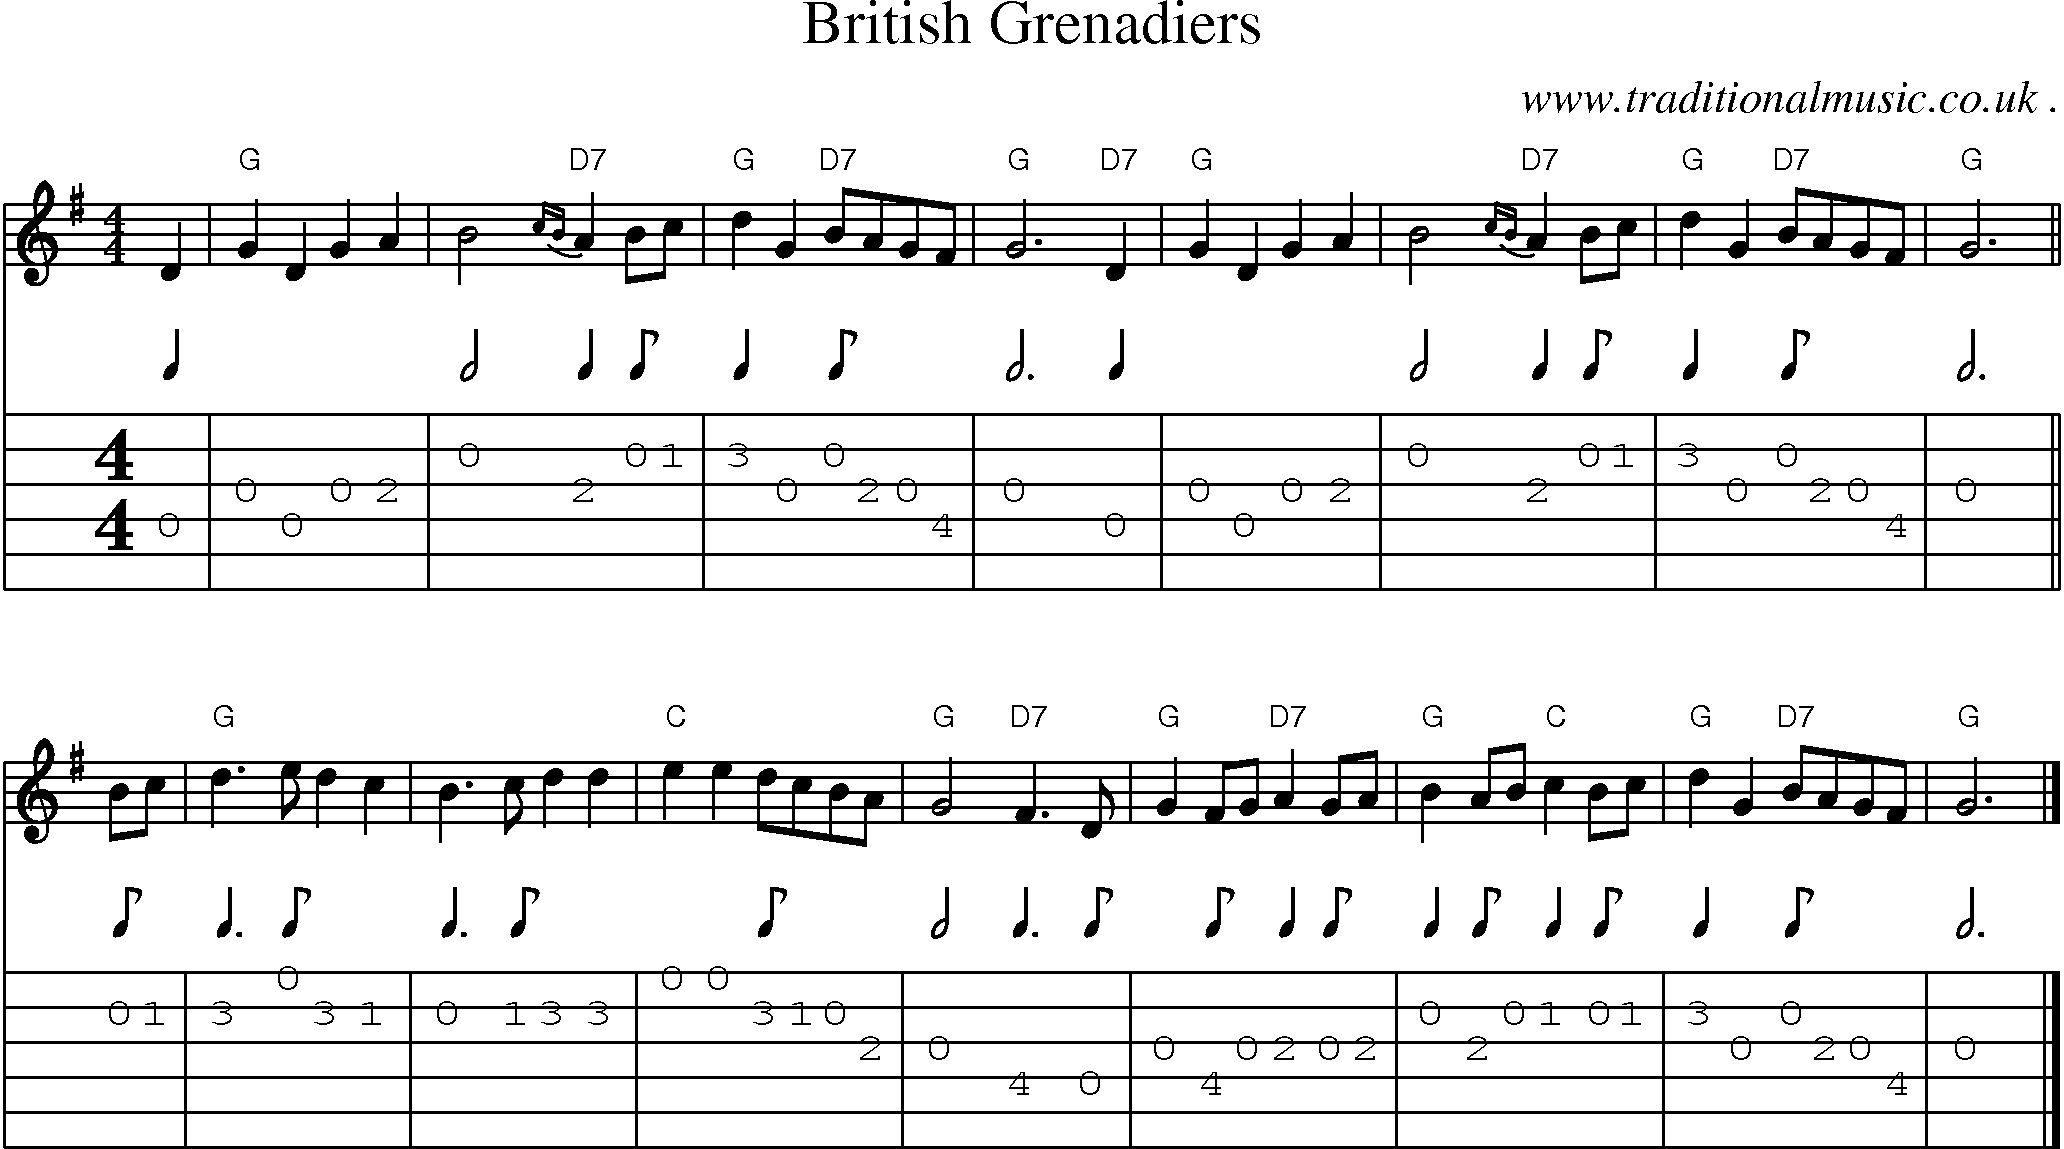 Sheet-music  score, Chords and Guitar Tabs for British Grenadiers